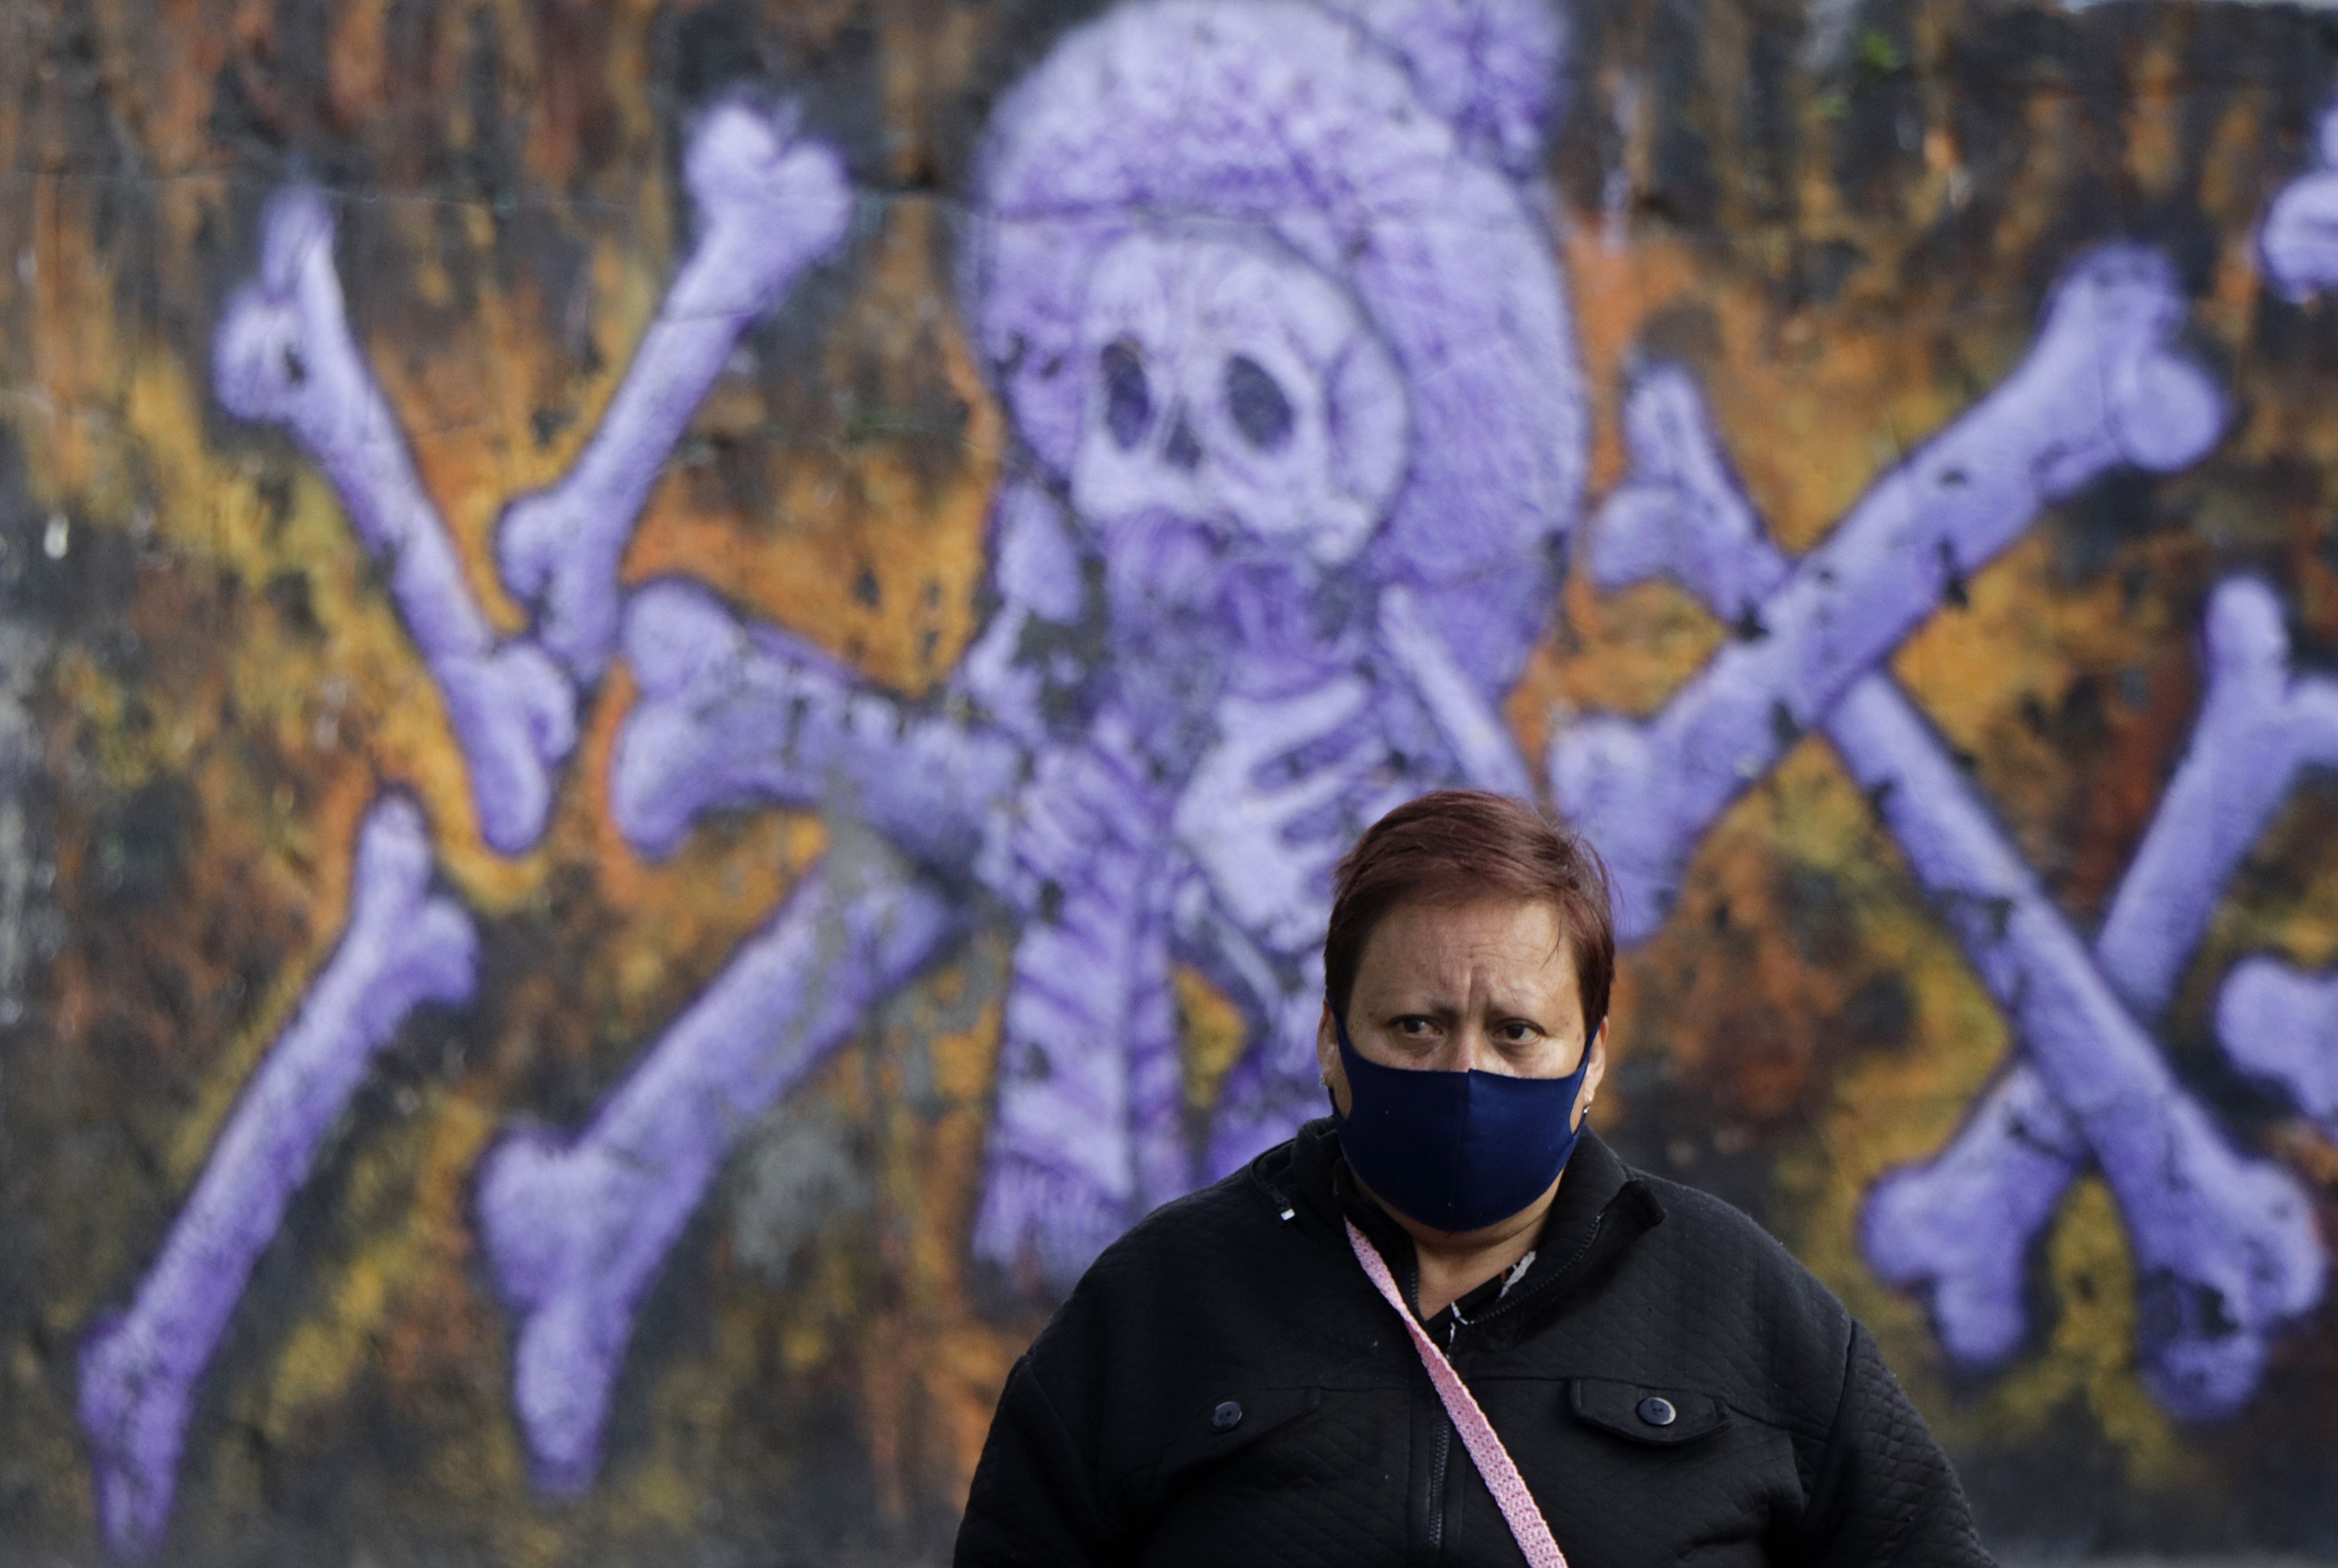 12/06/2020 12 June 2020, Mexico, Mexico City: A woman wearing a black face mask stands at the entrance of the crematorium "San Nicolas Tolentino" in front of a mural amid the Coronavirus pandemic. Despite the ongoing corona pandemic, Mexico's President Lopez Obrador wants to return to normality as quickly as possible. Photo: Gerardo Vieyra/dpa POLITICA INTERNACIONAL Gerardo Vieyra/dpa 